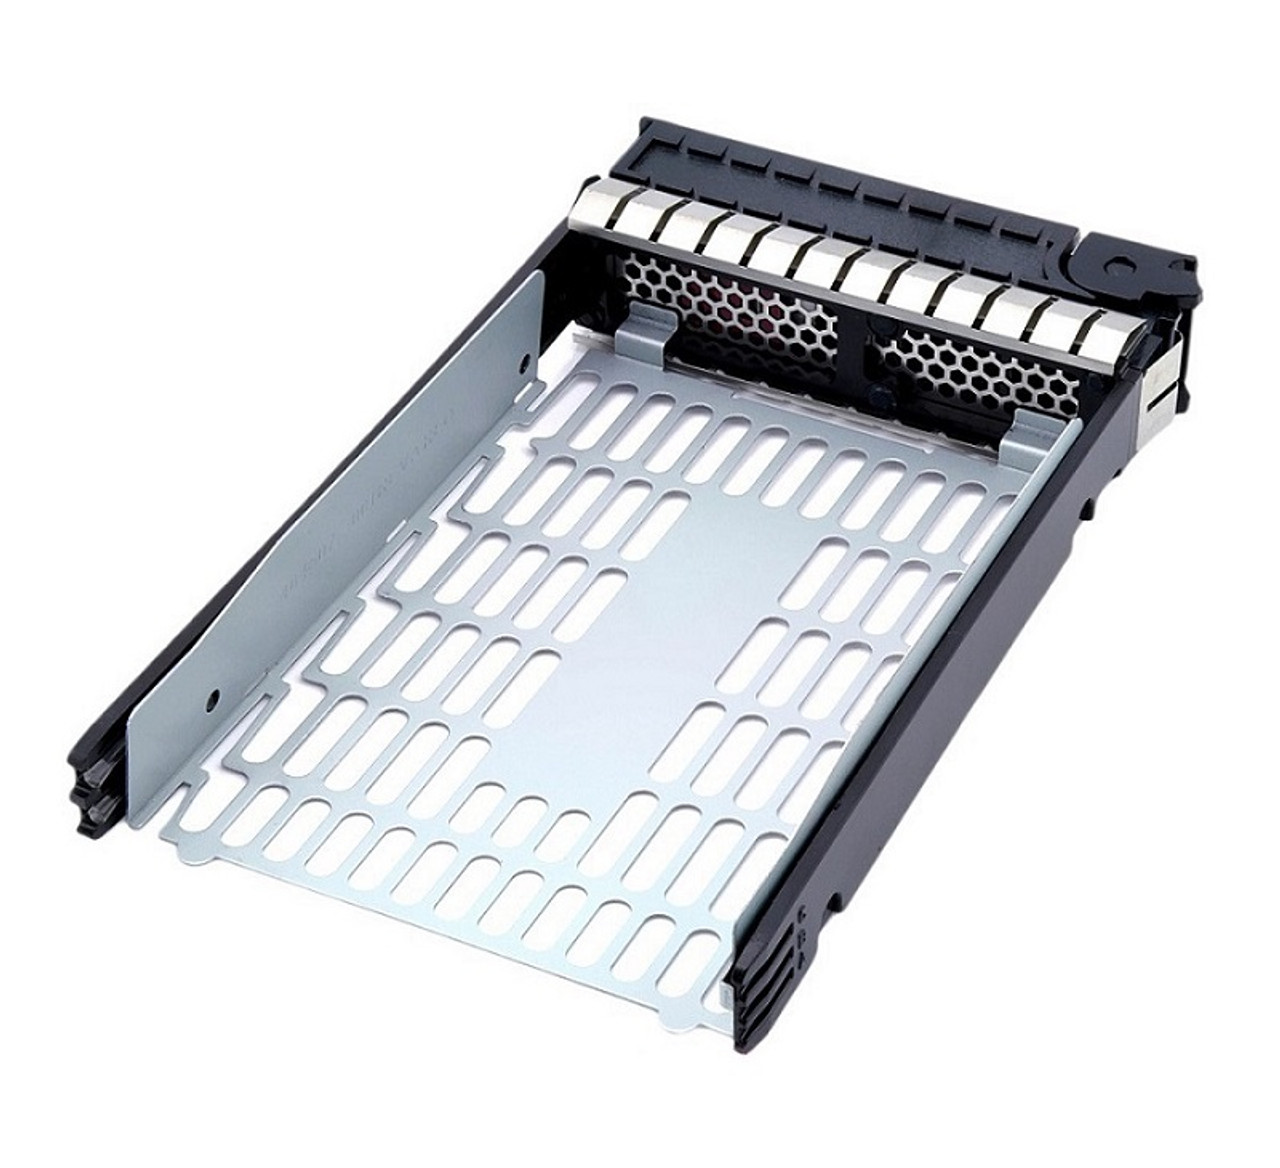 Y980C - Dell 3.5-inch Hot-pluggable SAS/SATA Hard Drive Tray Sled Caddy for PowerEdge and PowerVault Servers